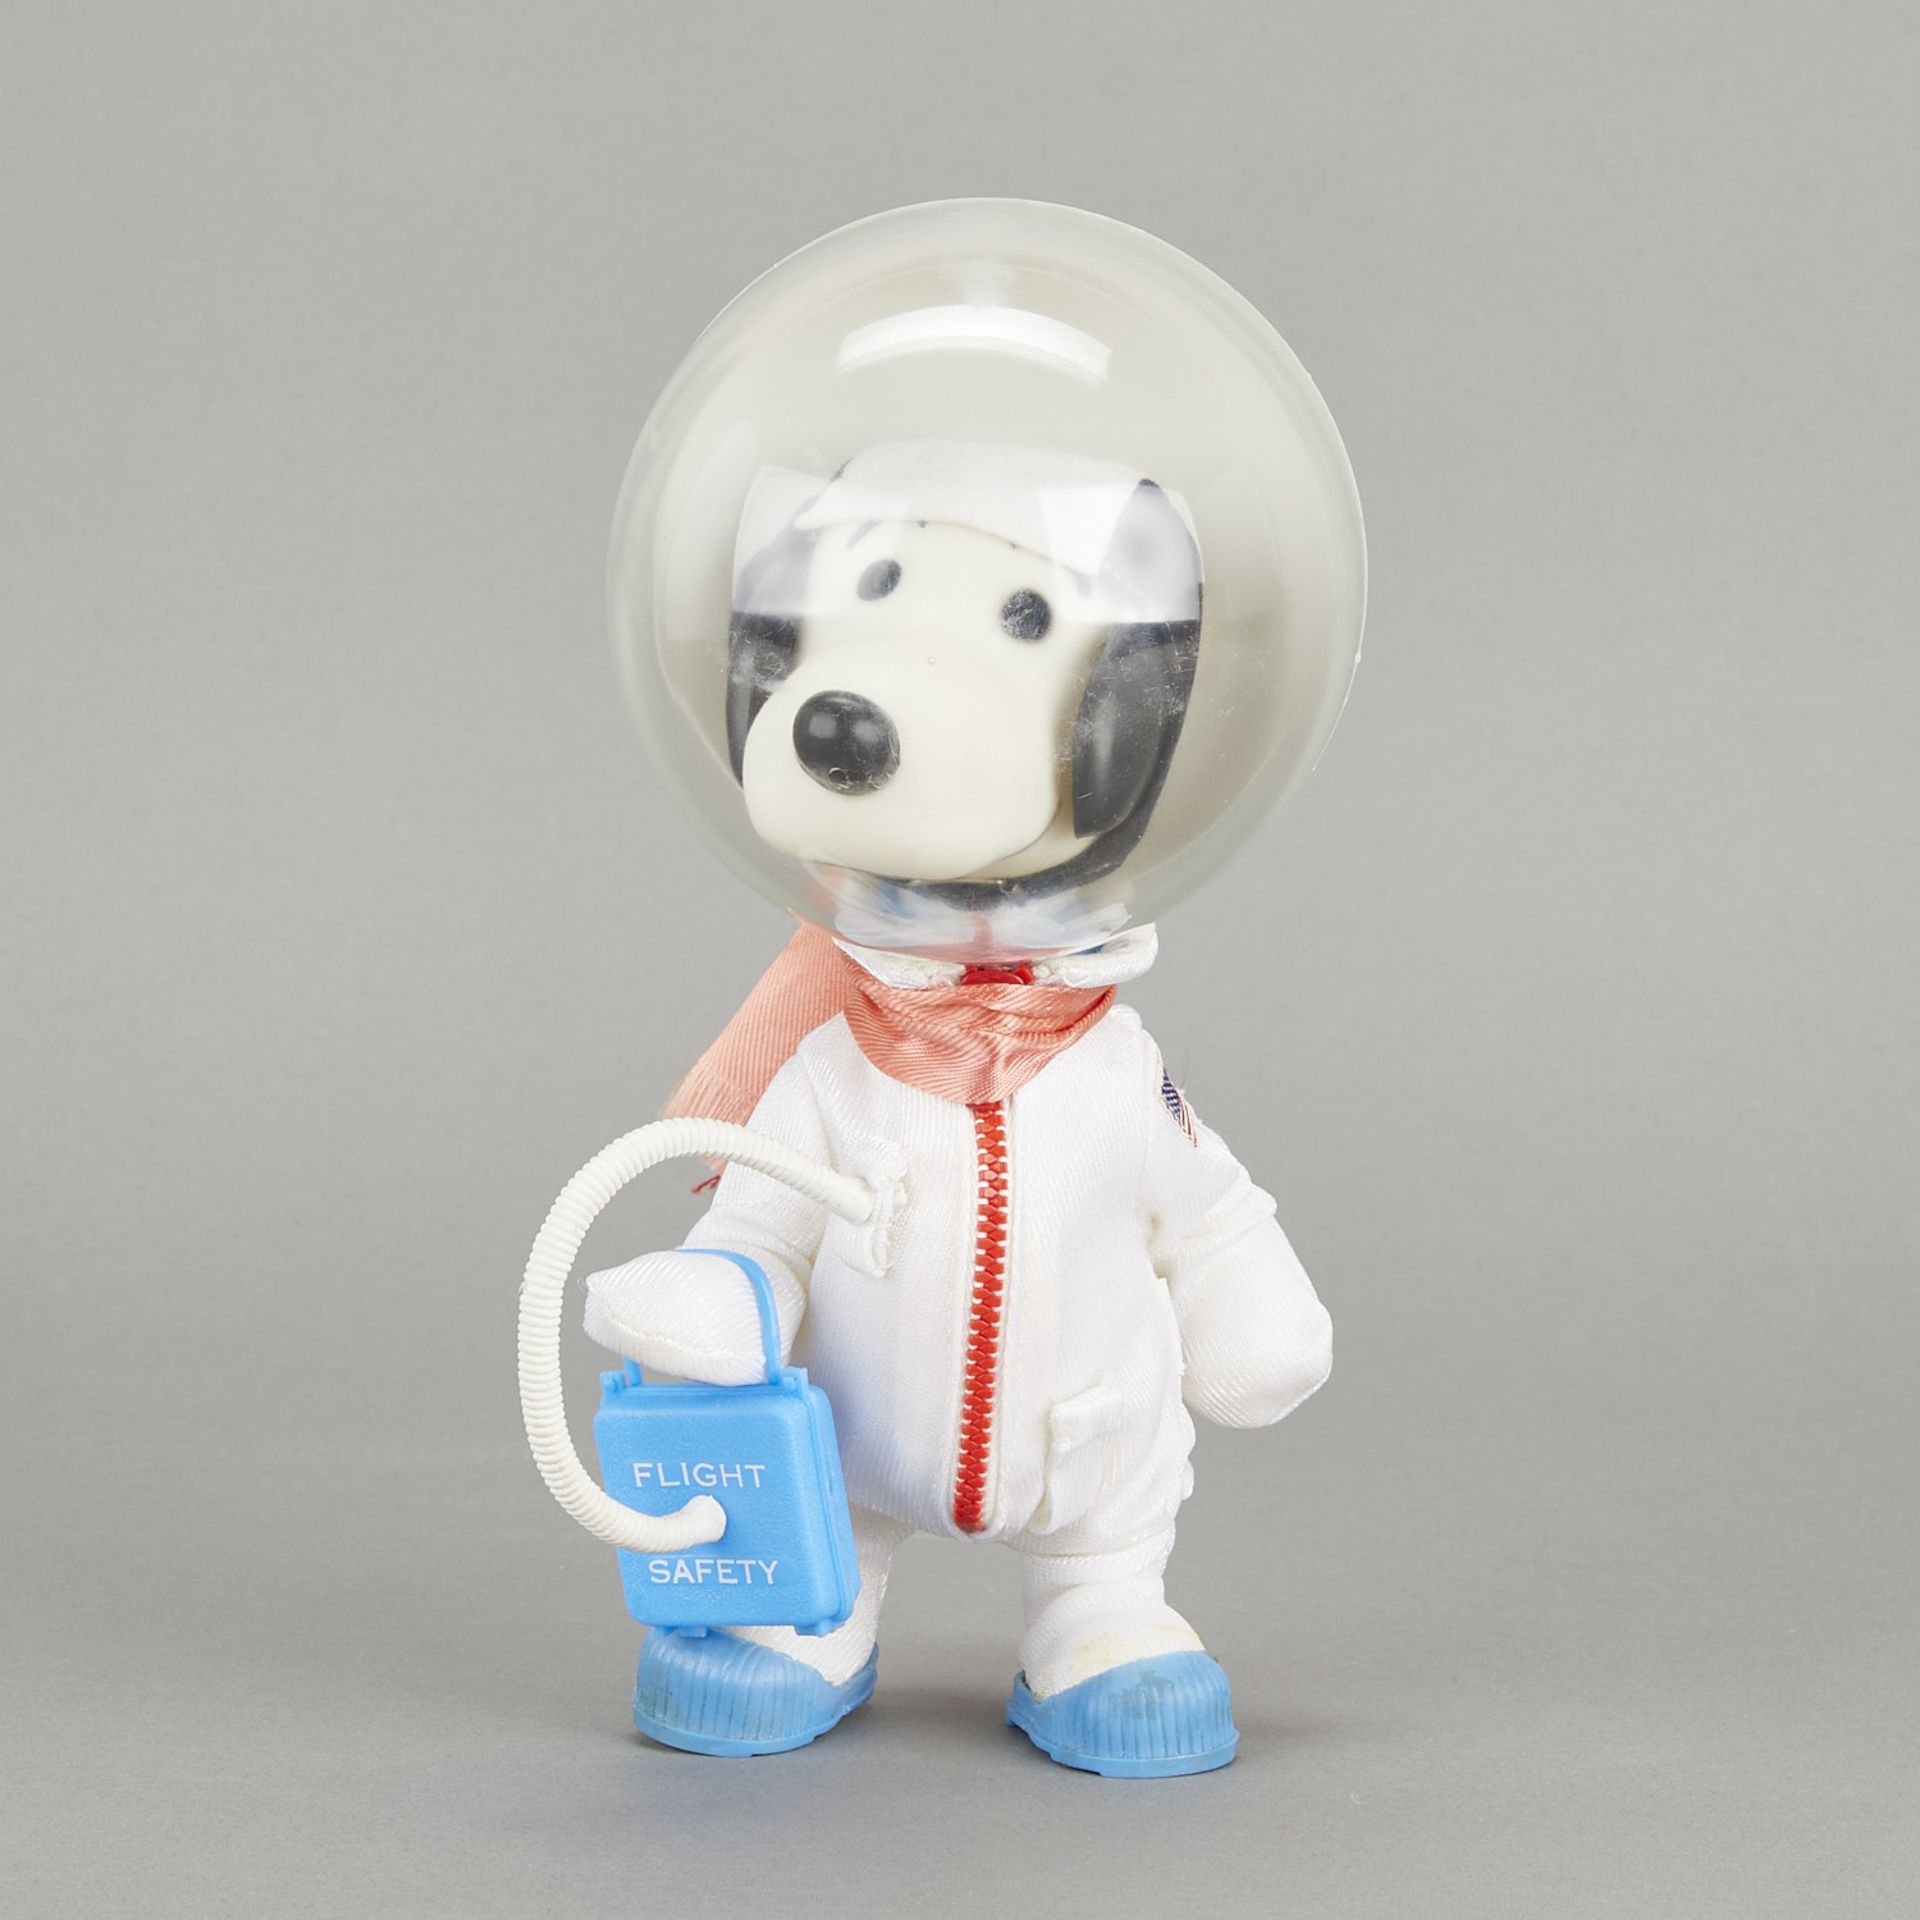 Snoopy Astronaut Pocket Doll with Box - Image 2 of 14